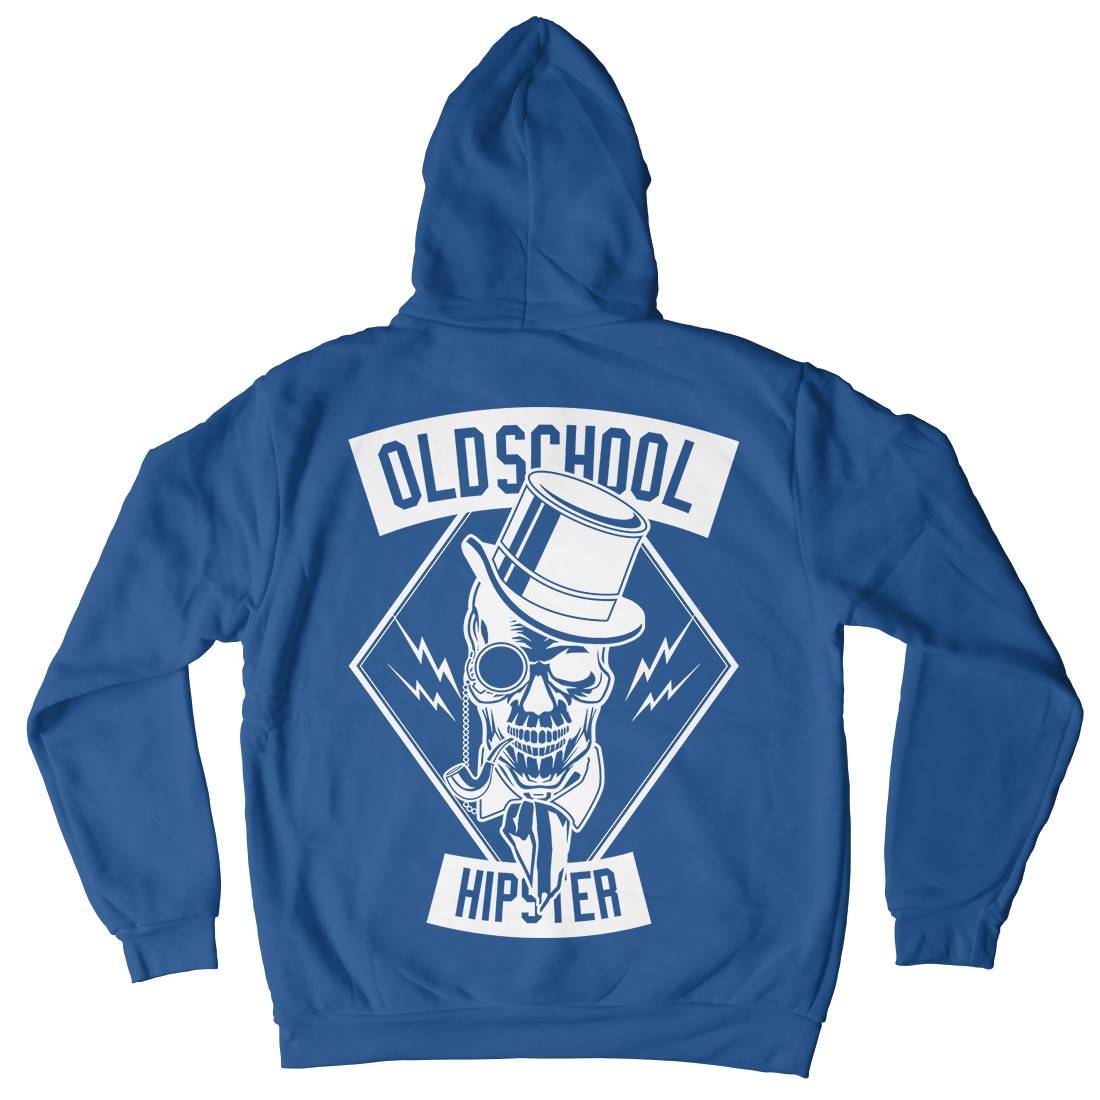 Old School Hipster Mens Hoodie With Pocket Retro B592